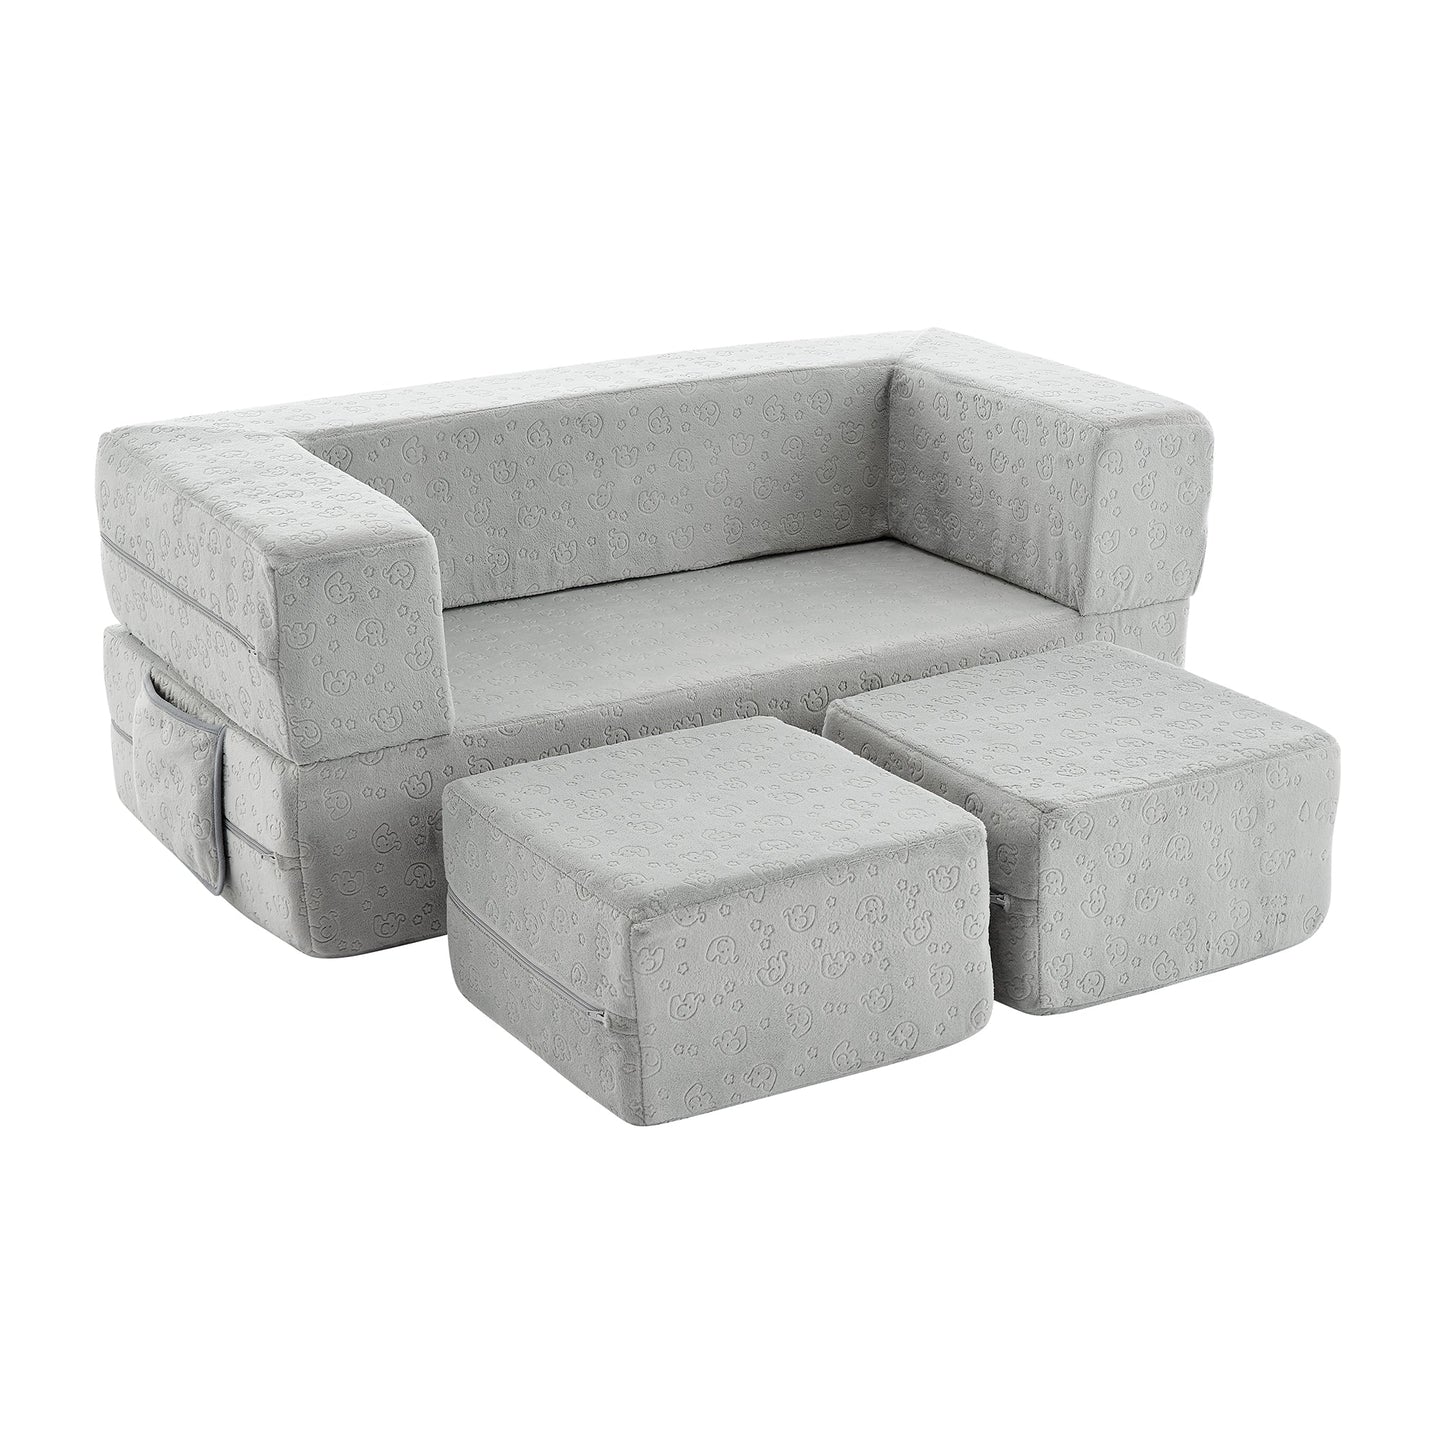 Kids Couch/ Sleeper with Ottomans, Loveseat Convertible Sofa Fold Out Lounger for Baby (Gray)